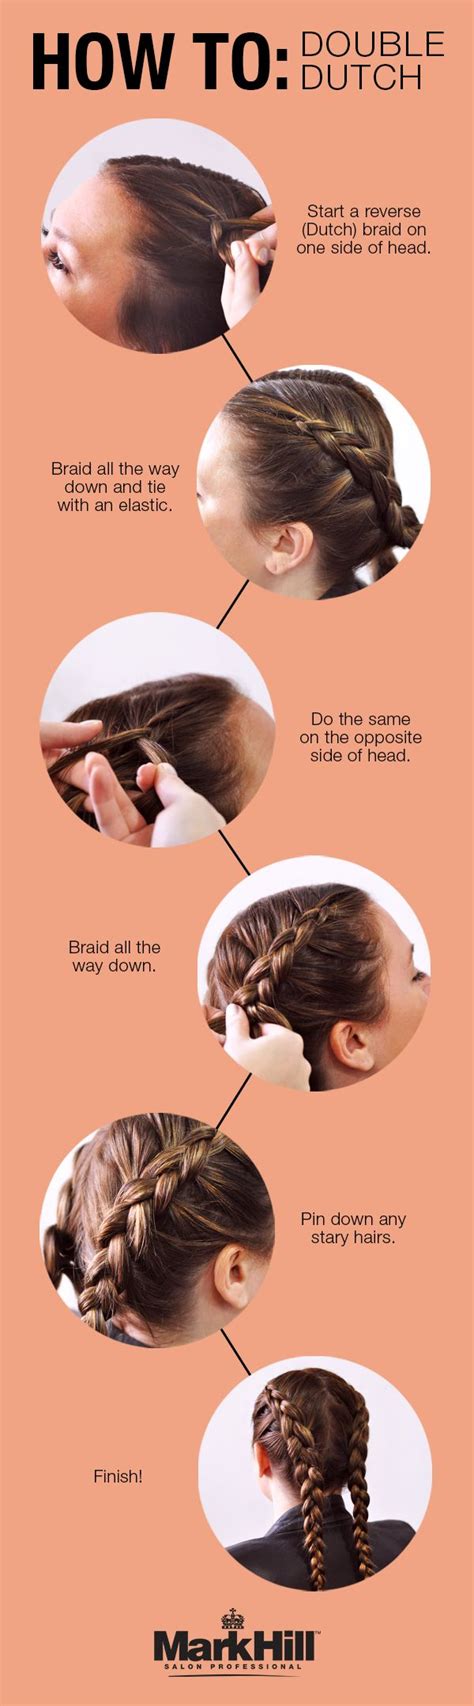 21 how to do 2 dutch braids on yourself step by step